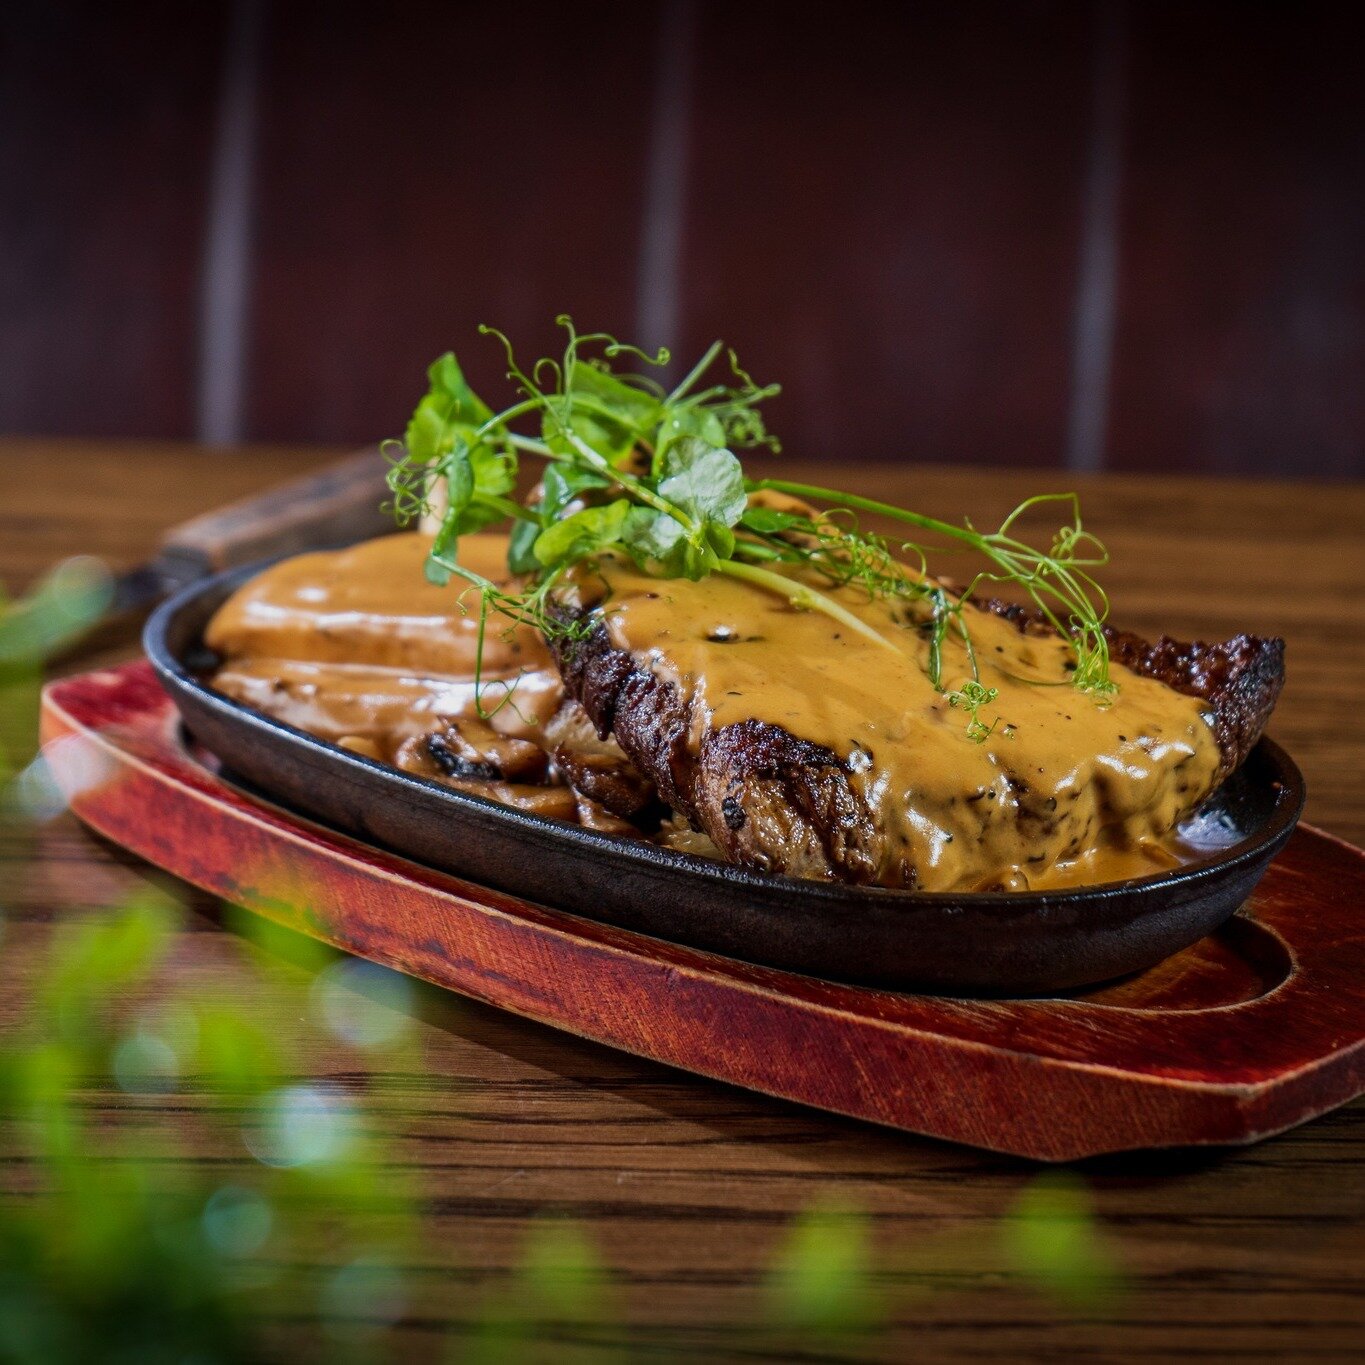 How tasty does this peppered steak look from @rococorestaurants 😍 Do you need food photography for your business?

Let's work together 👇

💻www.whatsnextcreative.com
📞0044 28 7035 0583
✉️hello@whatsnextcreative.com

#whatsnextcreative #designagenc